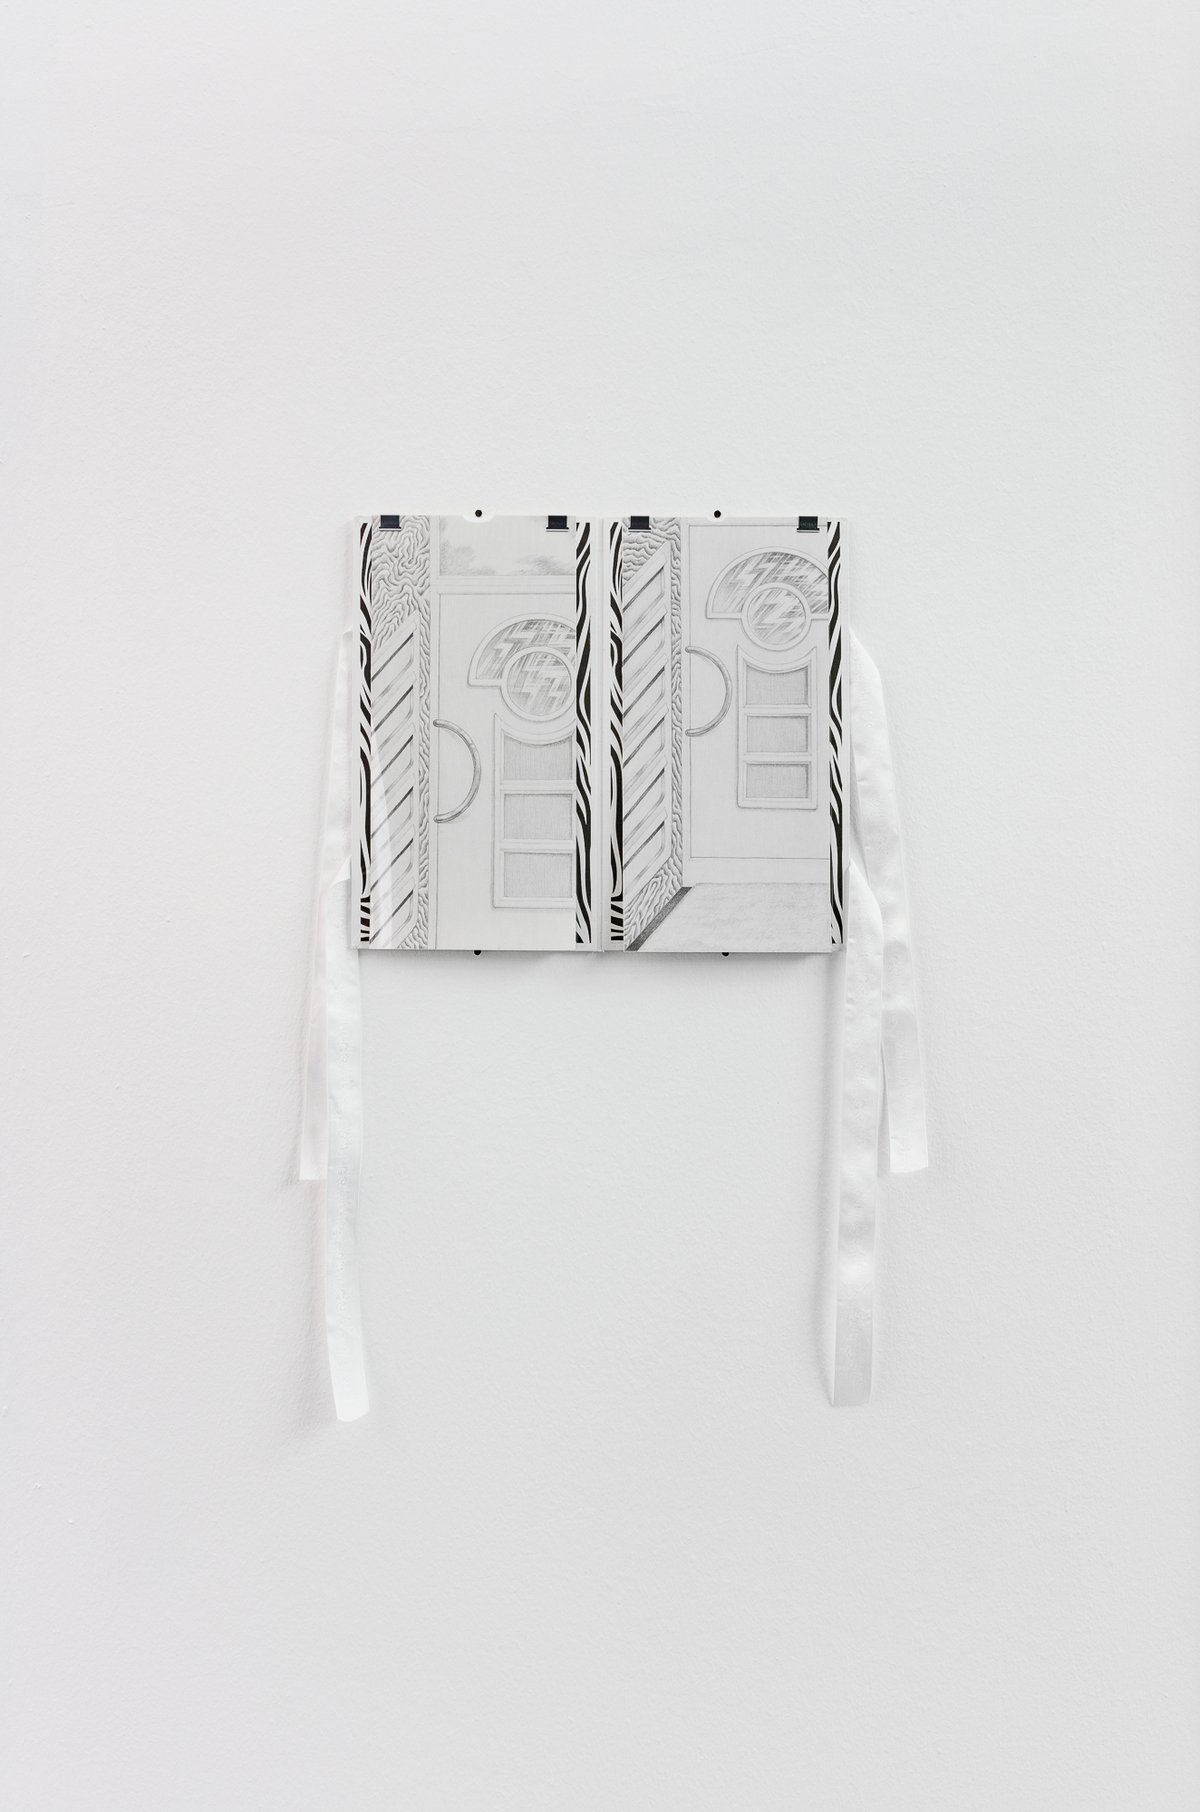 Yong Xiang LiWhite portfolio with zebra lining (neighbourhood watch), 2021Pencil on paper, cardboard, chelsea bookcloth, zebra print paper, floral synthetic ribbon, acetate, paper clip34 x 38 cm